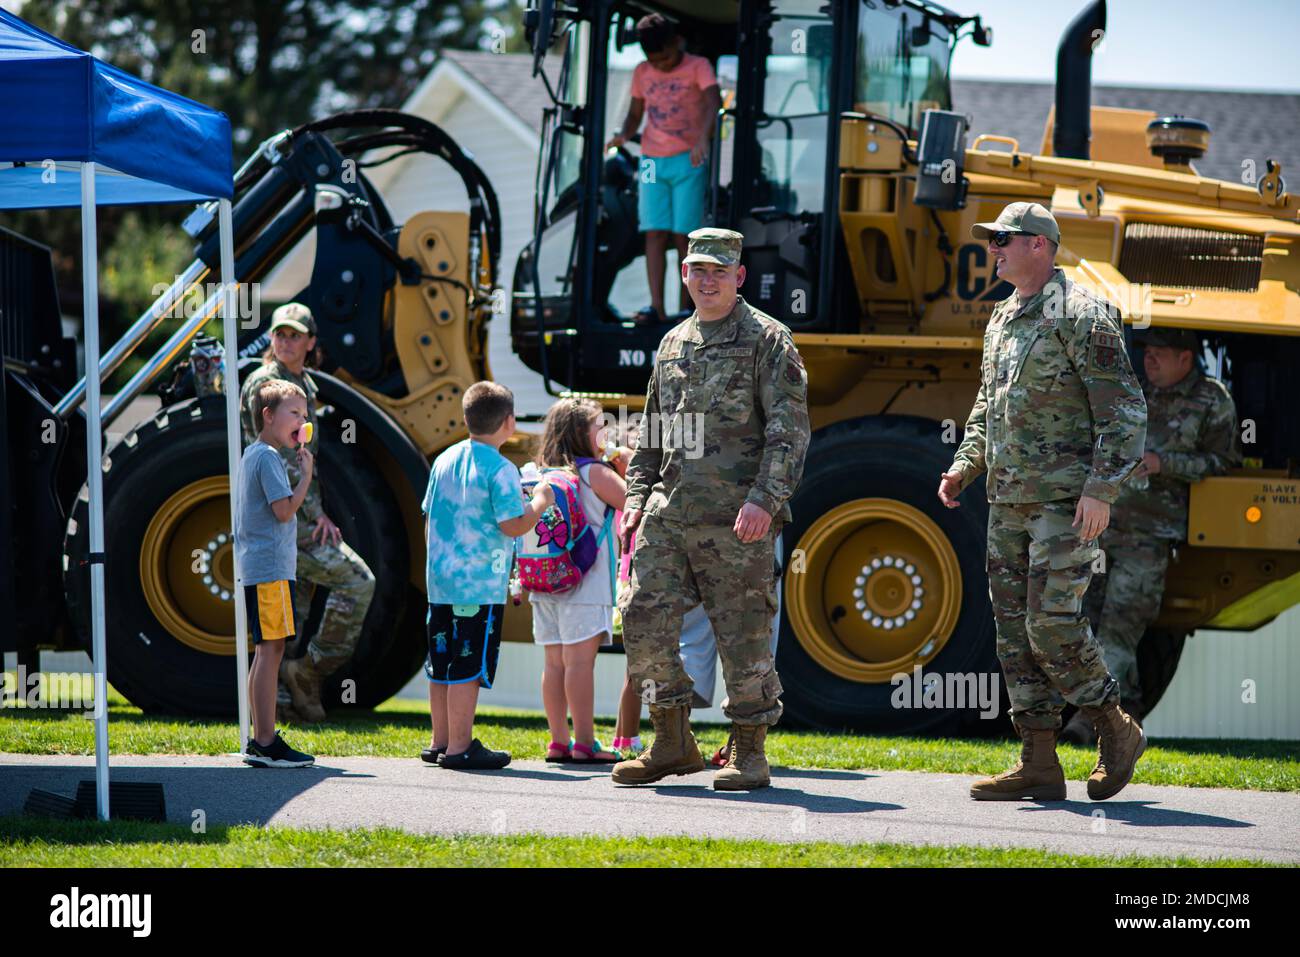 Tech. Sgt. Derek Senter, 141st Civil Engineer Squadron and Master Sgt. Evan Jacobus, 141st Logistics Readiness Squadron walk by a front end loader as children wait in line to check it out at Liberty Lake, Wash. July 15, 2022. The Airmen were out supporting the annual Touch-A-Truck event allowing both children and adults to check out heavy equipment from multiple agencies. Stock Photo